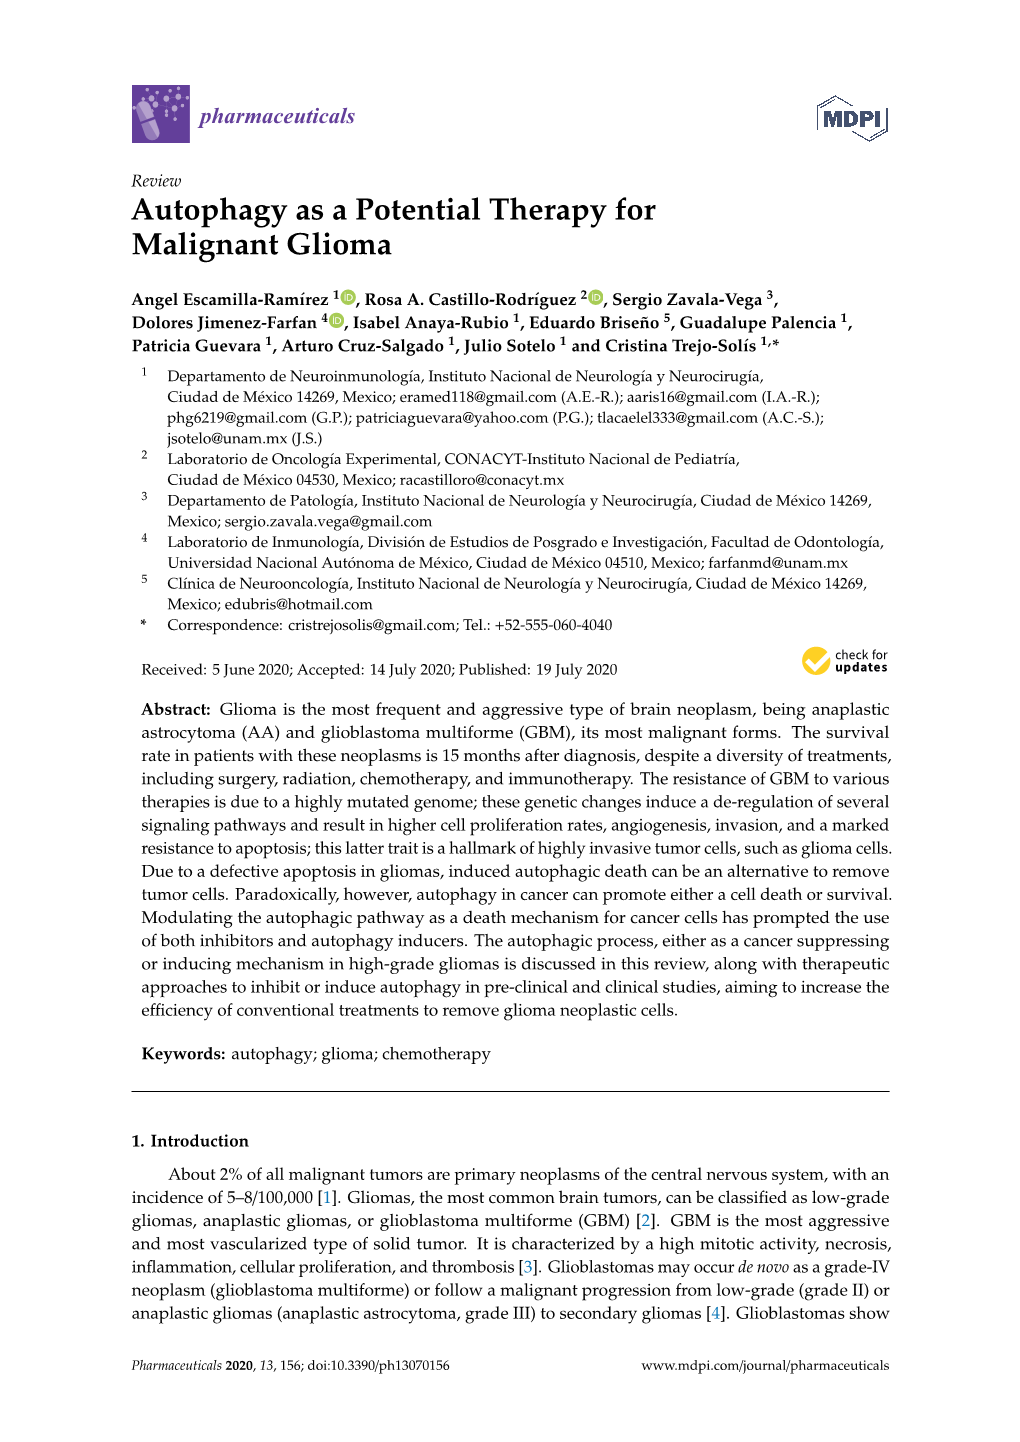 Autophagy As a Potential Therapy for Malignant Glioma